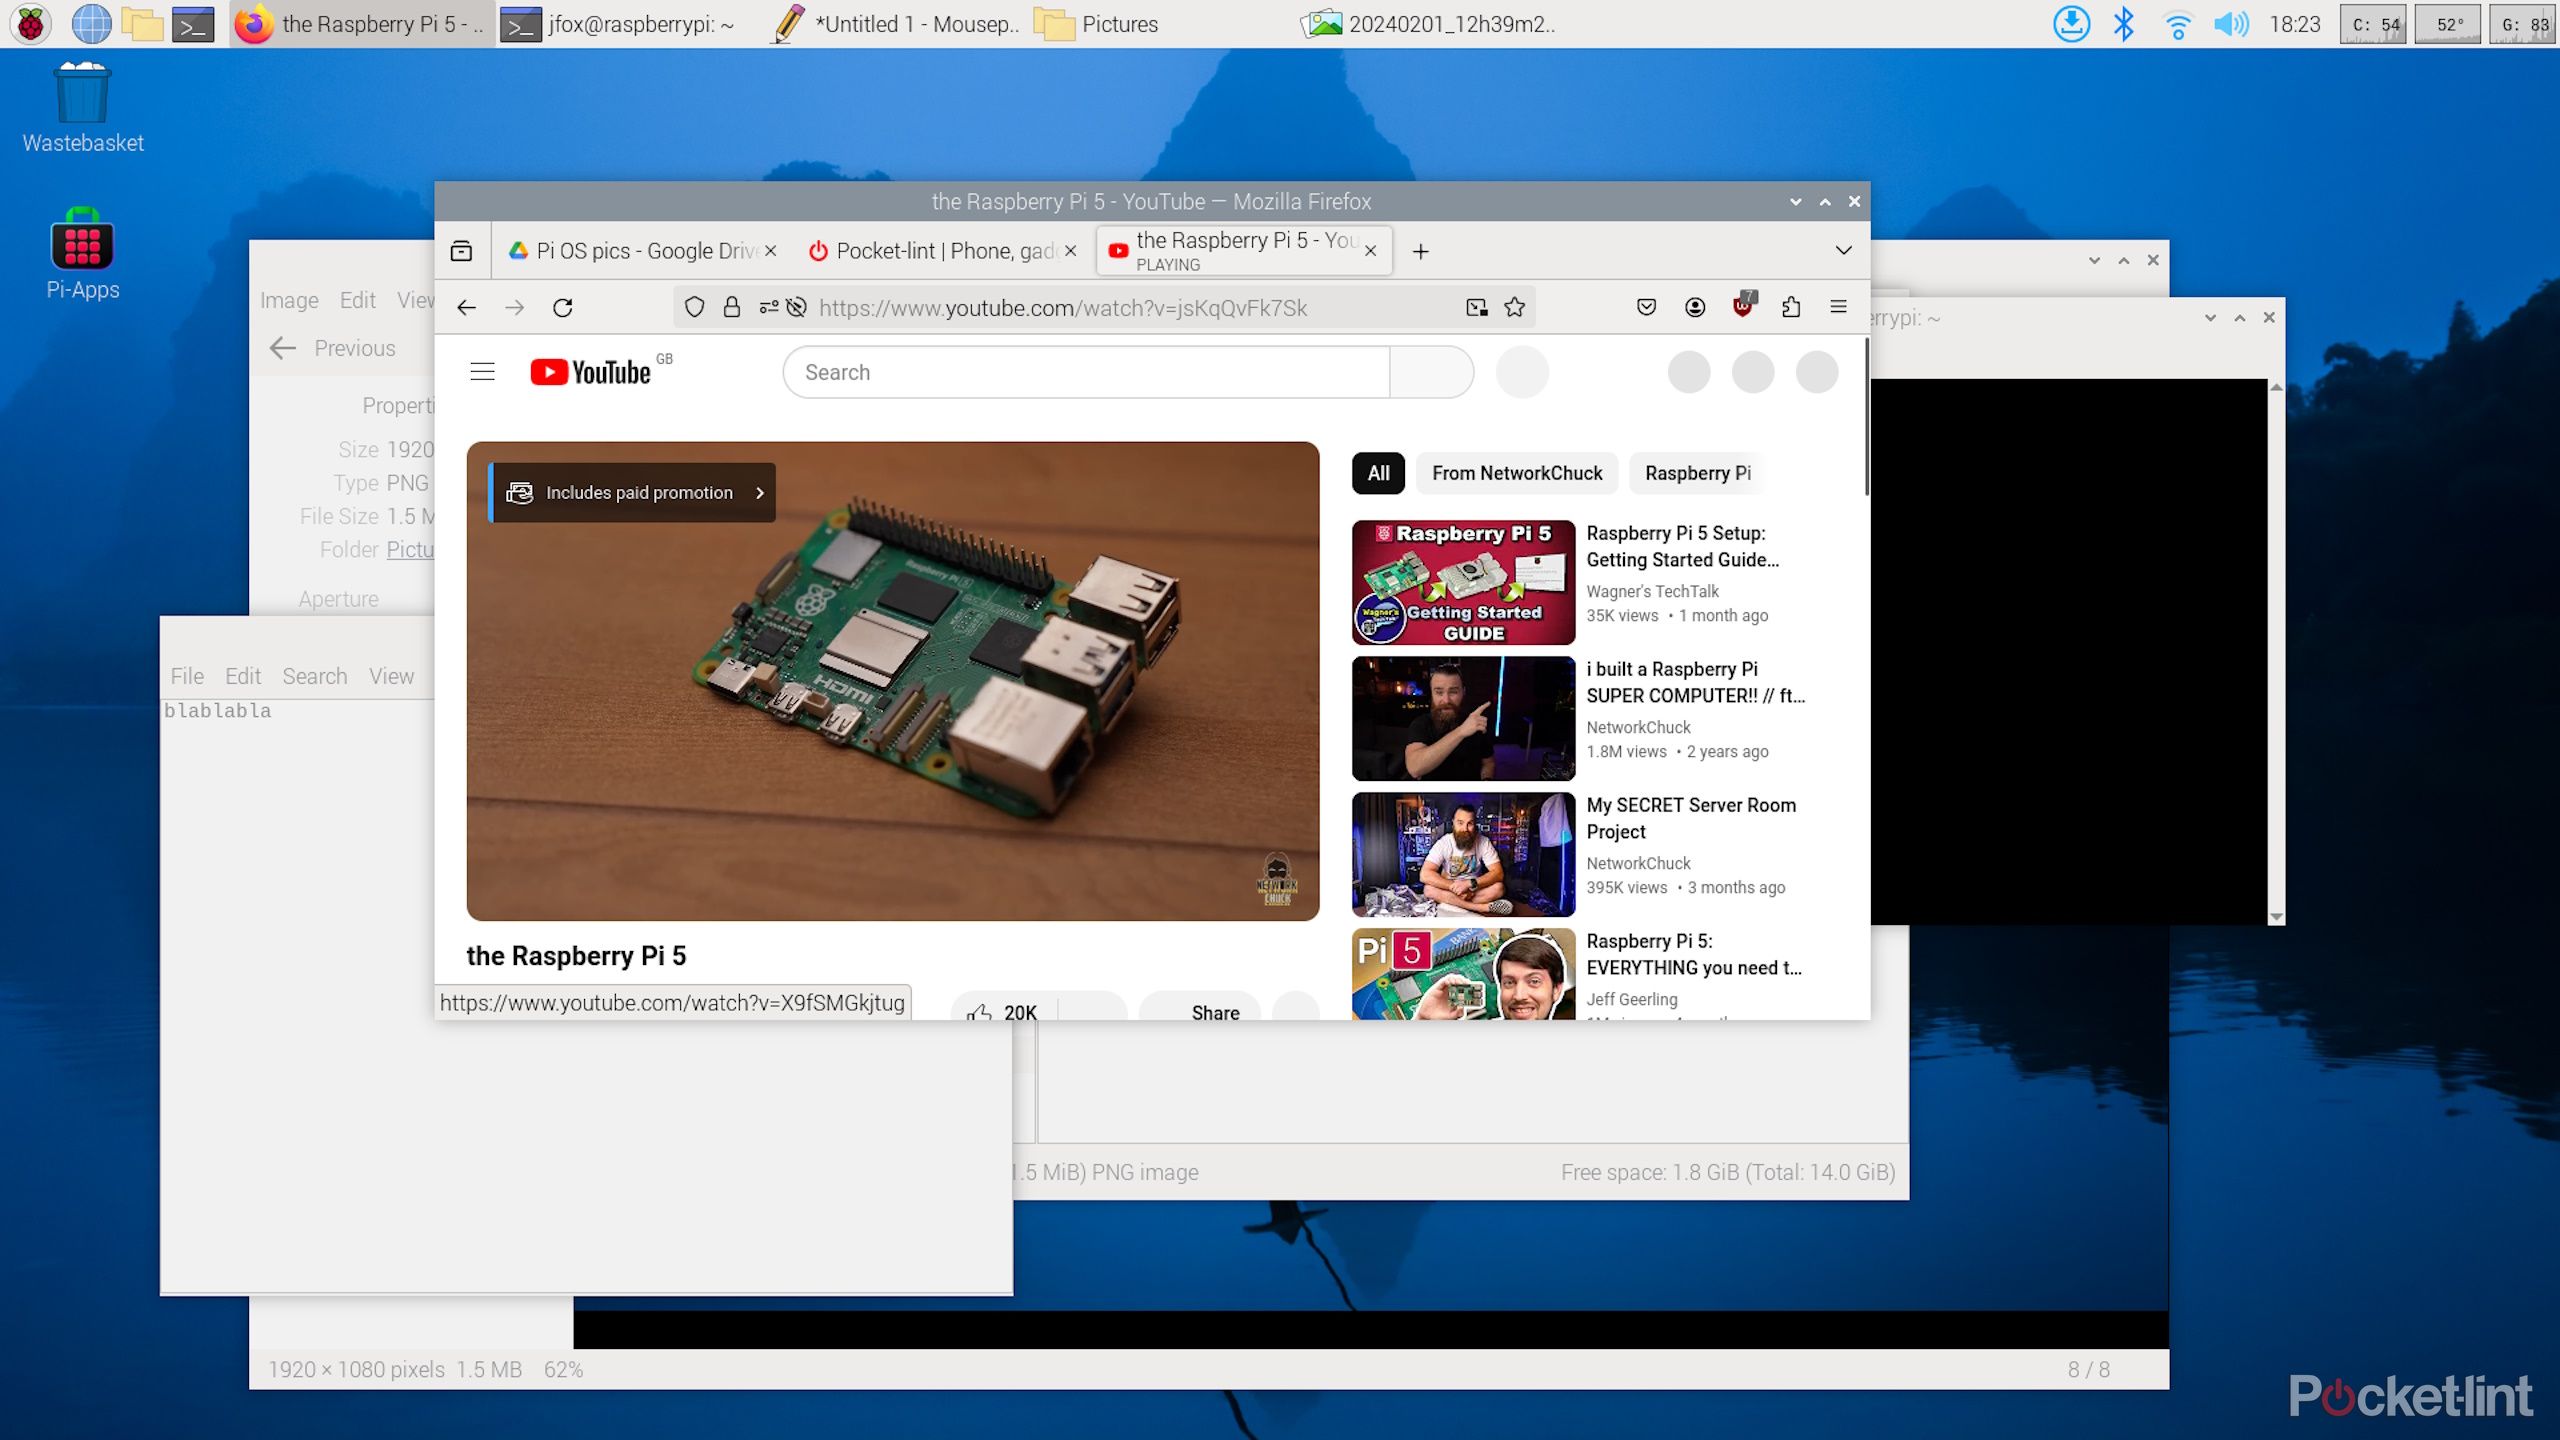 Raspberry Pi OS running multiple applications and browsing the web